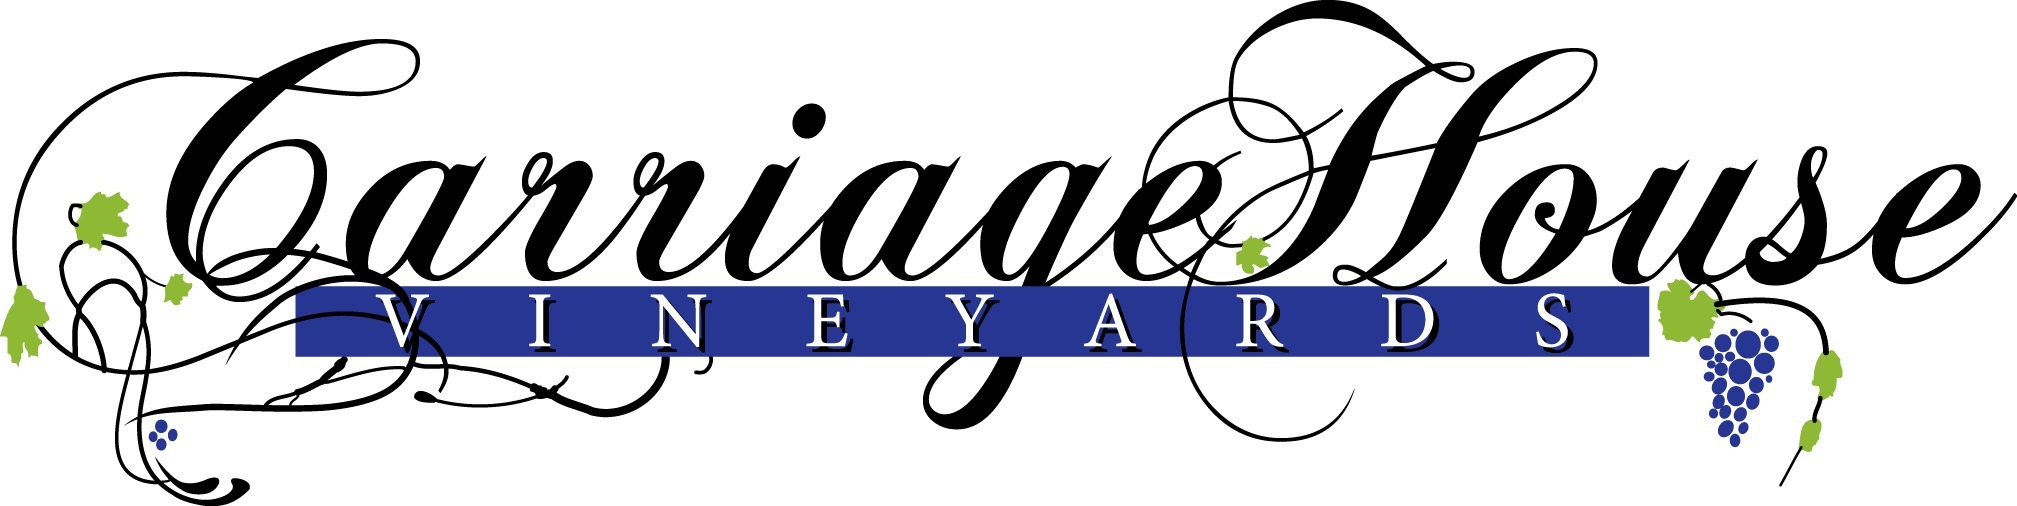 Logo for Carriage House Vineyards